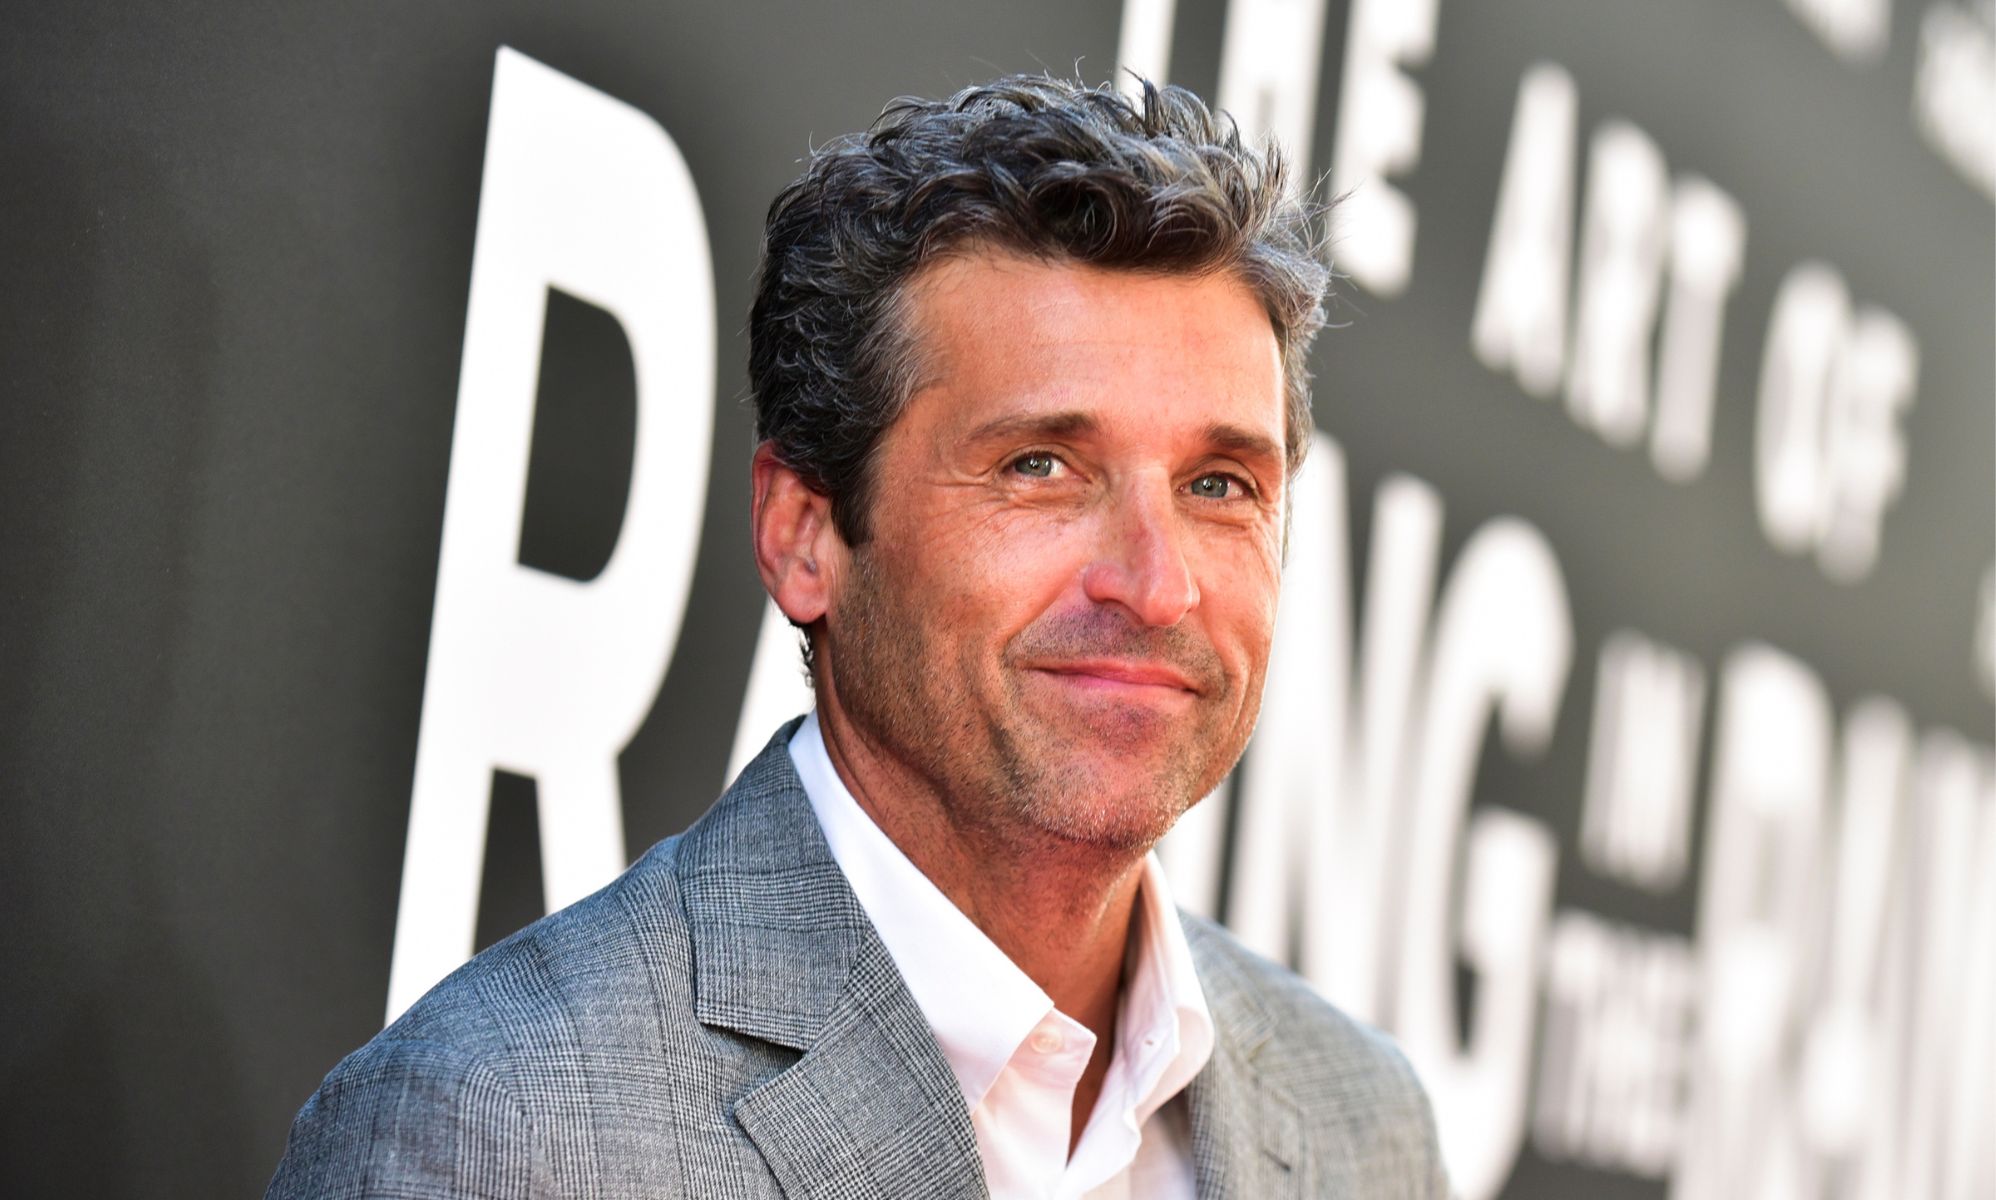 Patrick Dempsey named 'Sexiest Man Alive' - and the internet has ...